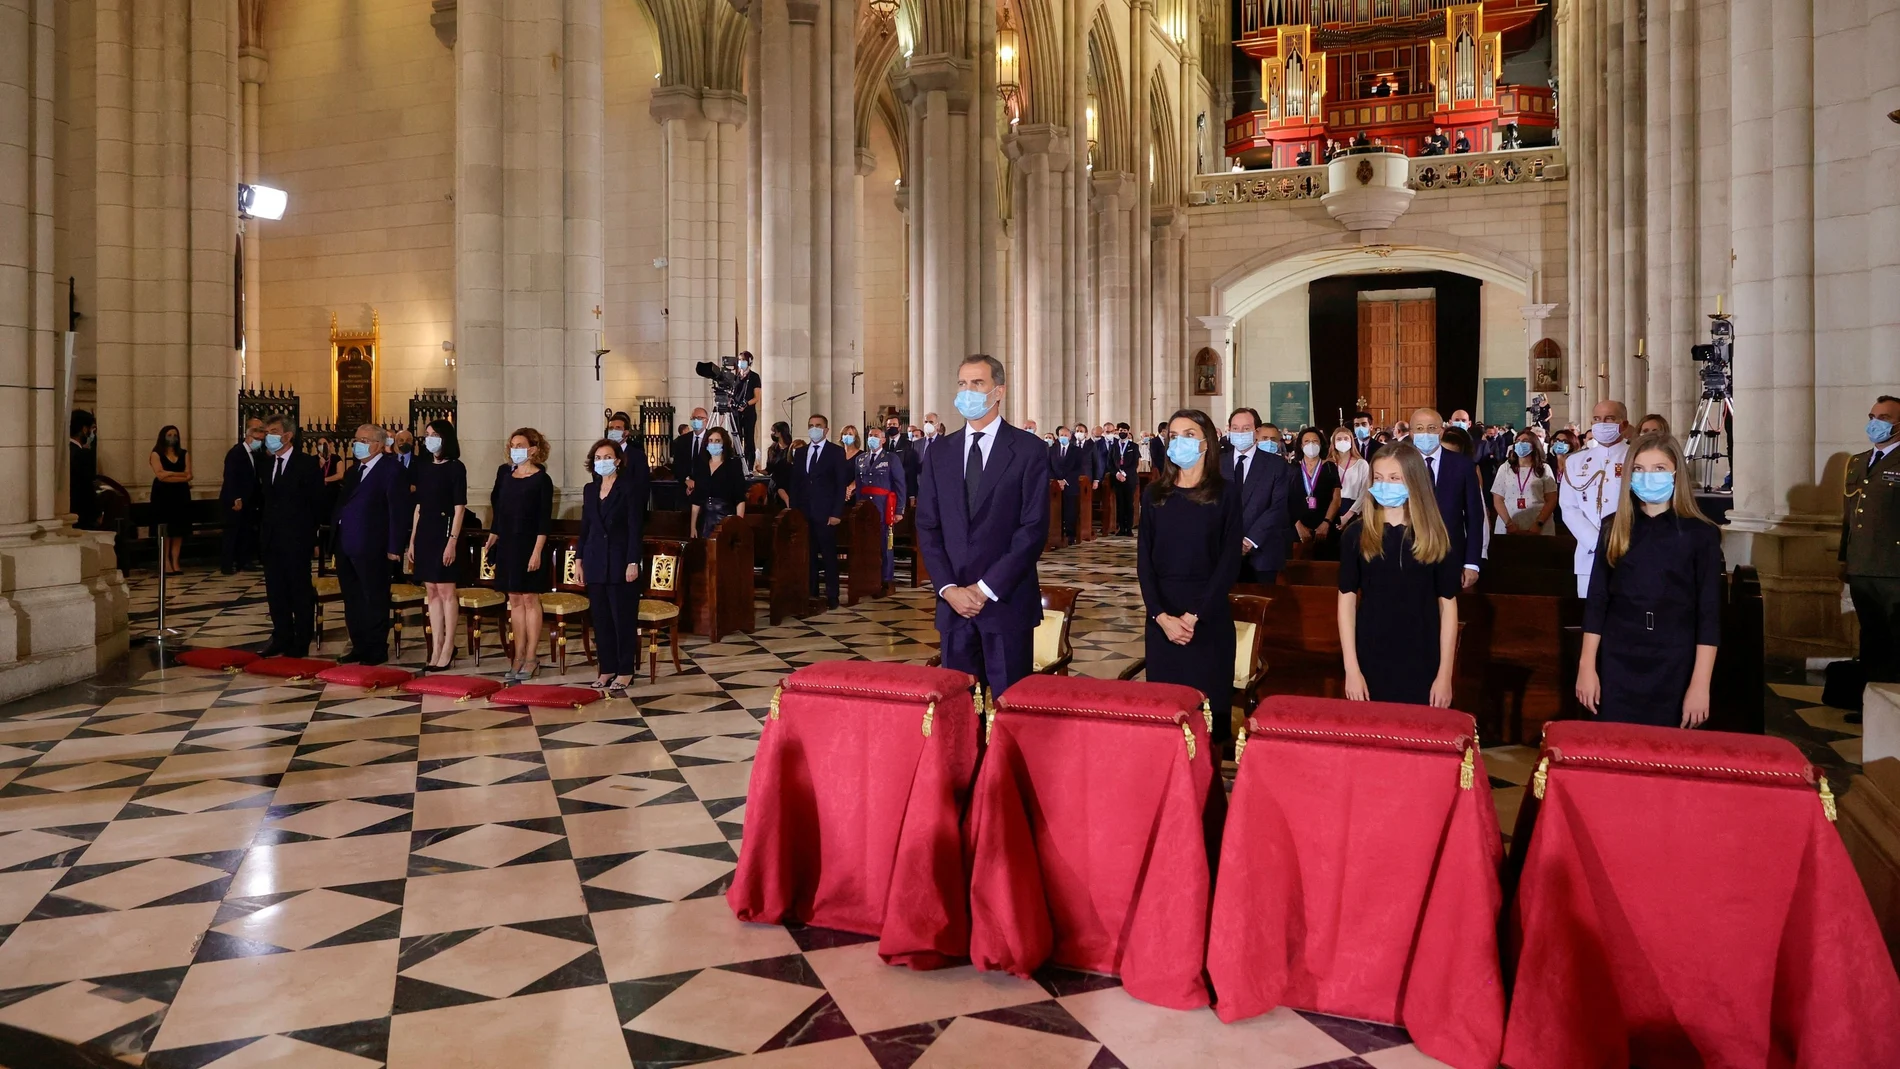 King Felipe and Queen Letizia of Spain, Princess Leonor and Infanta Sofia attend a funeral mass for the coronavirus disease (COVID-19) victims at La Almudena Cathedral in Madrid, Spain, July 6, 2020. Juanjo Martin/Pool via REUTERS